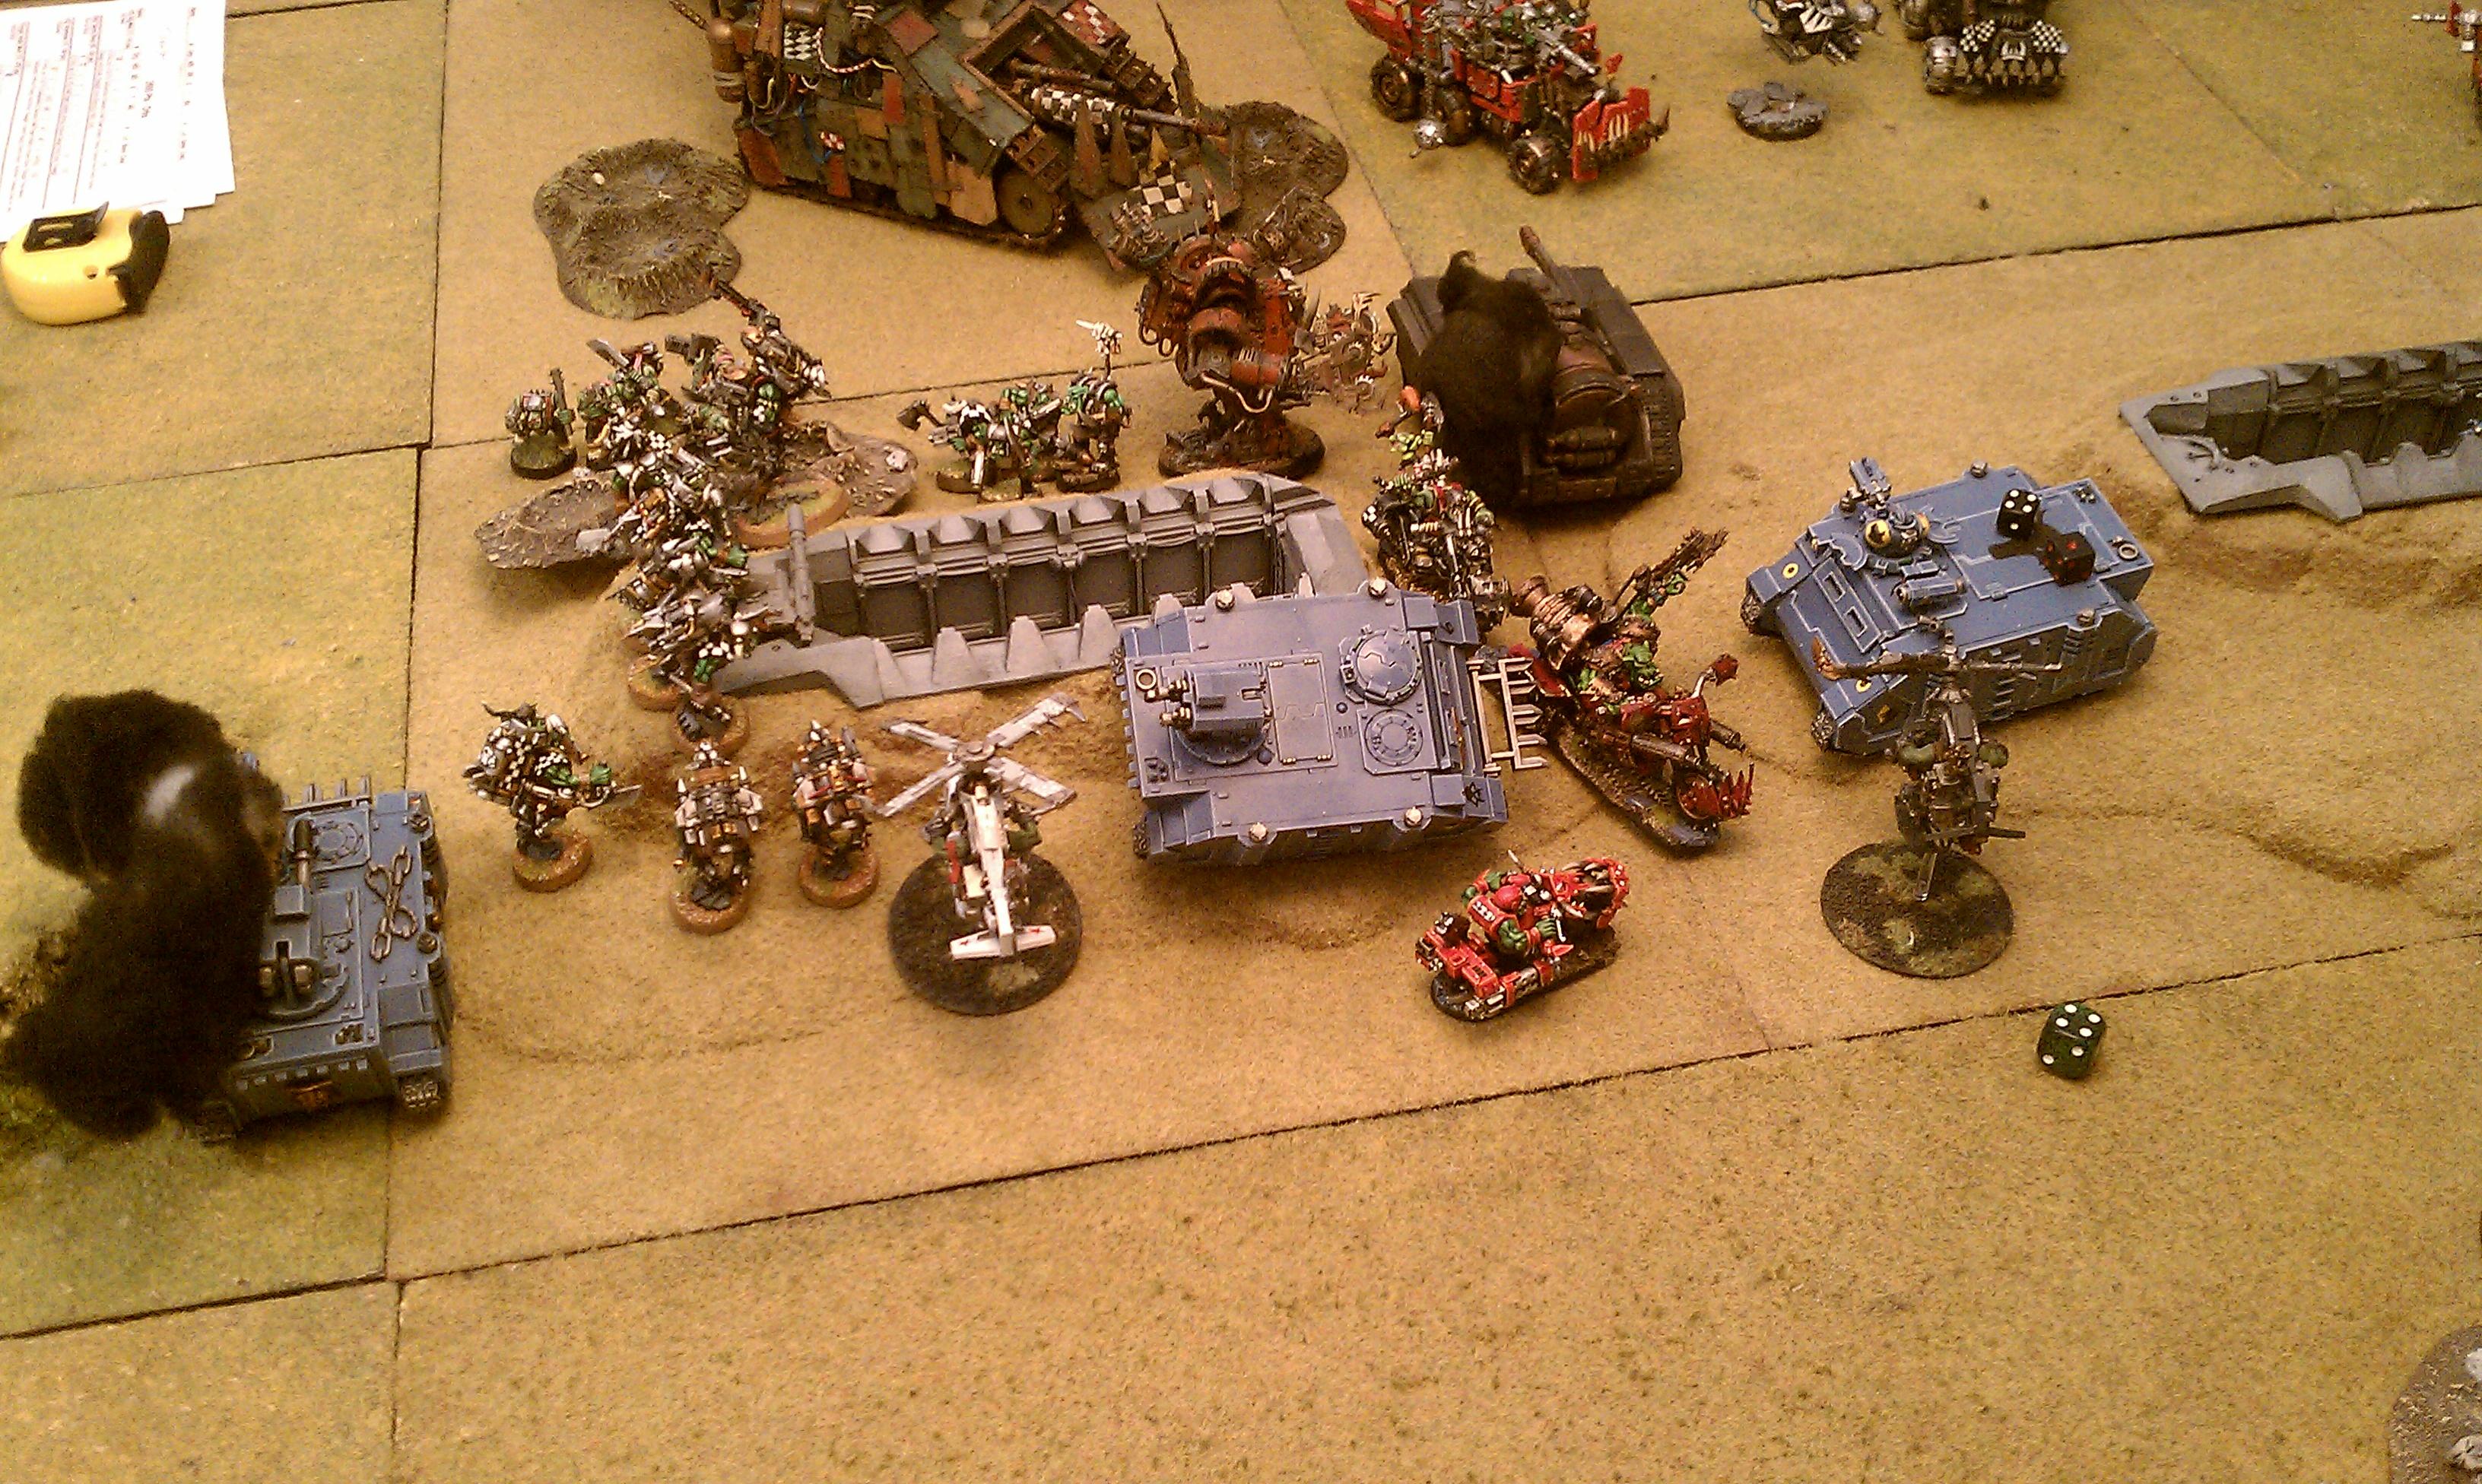 RAGNAR TAKES HIS TOLL BUT THE NOBZ PREVAIL